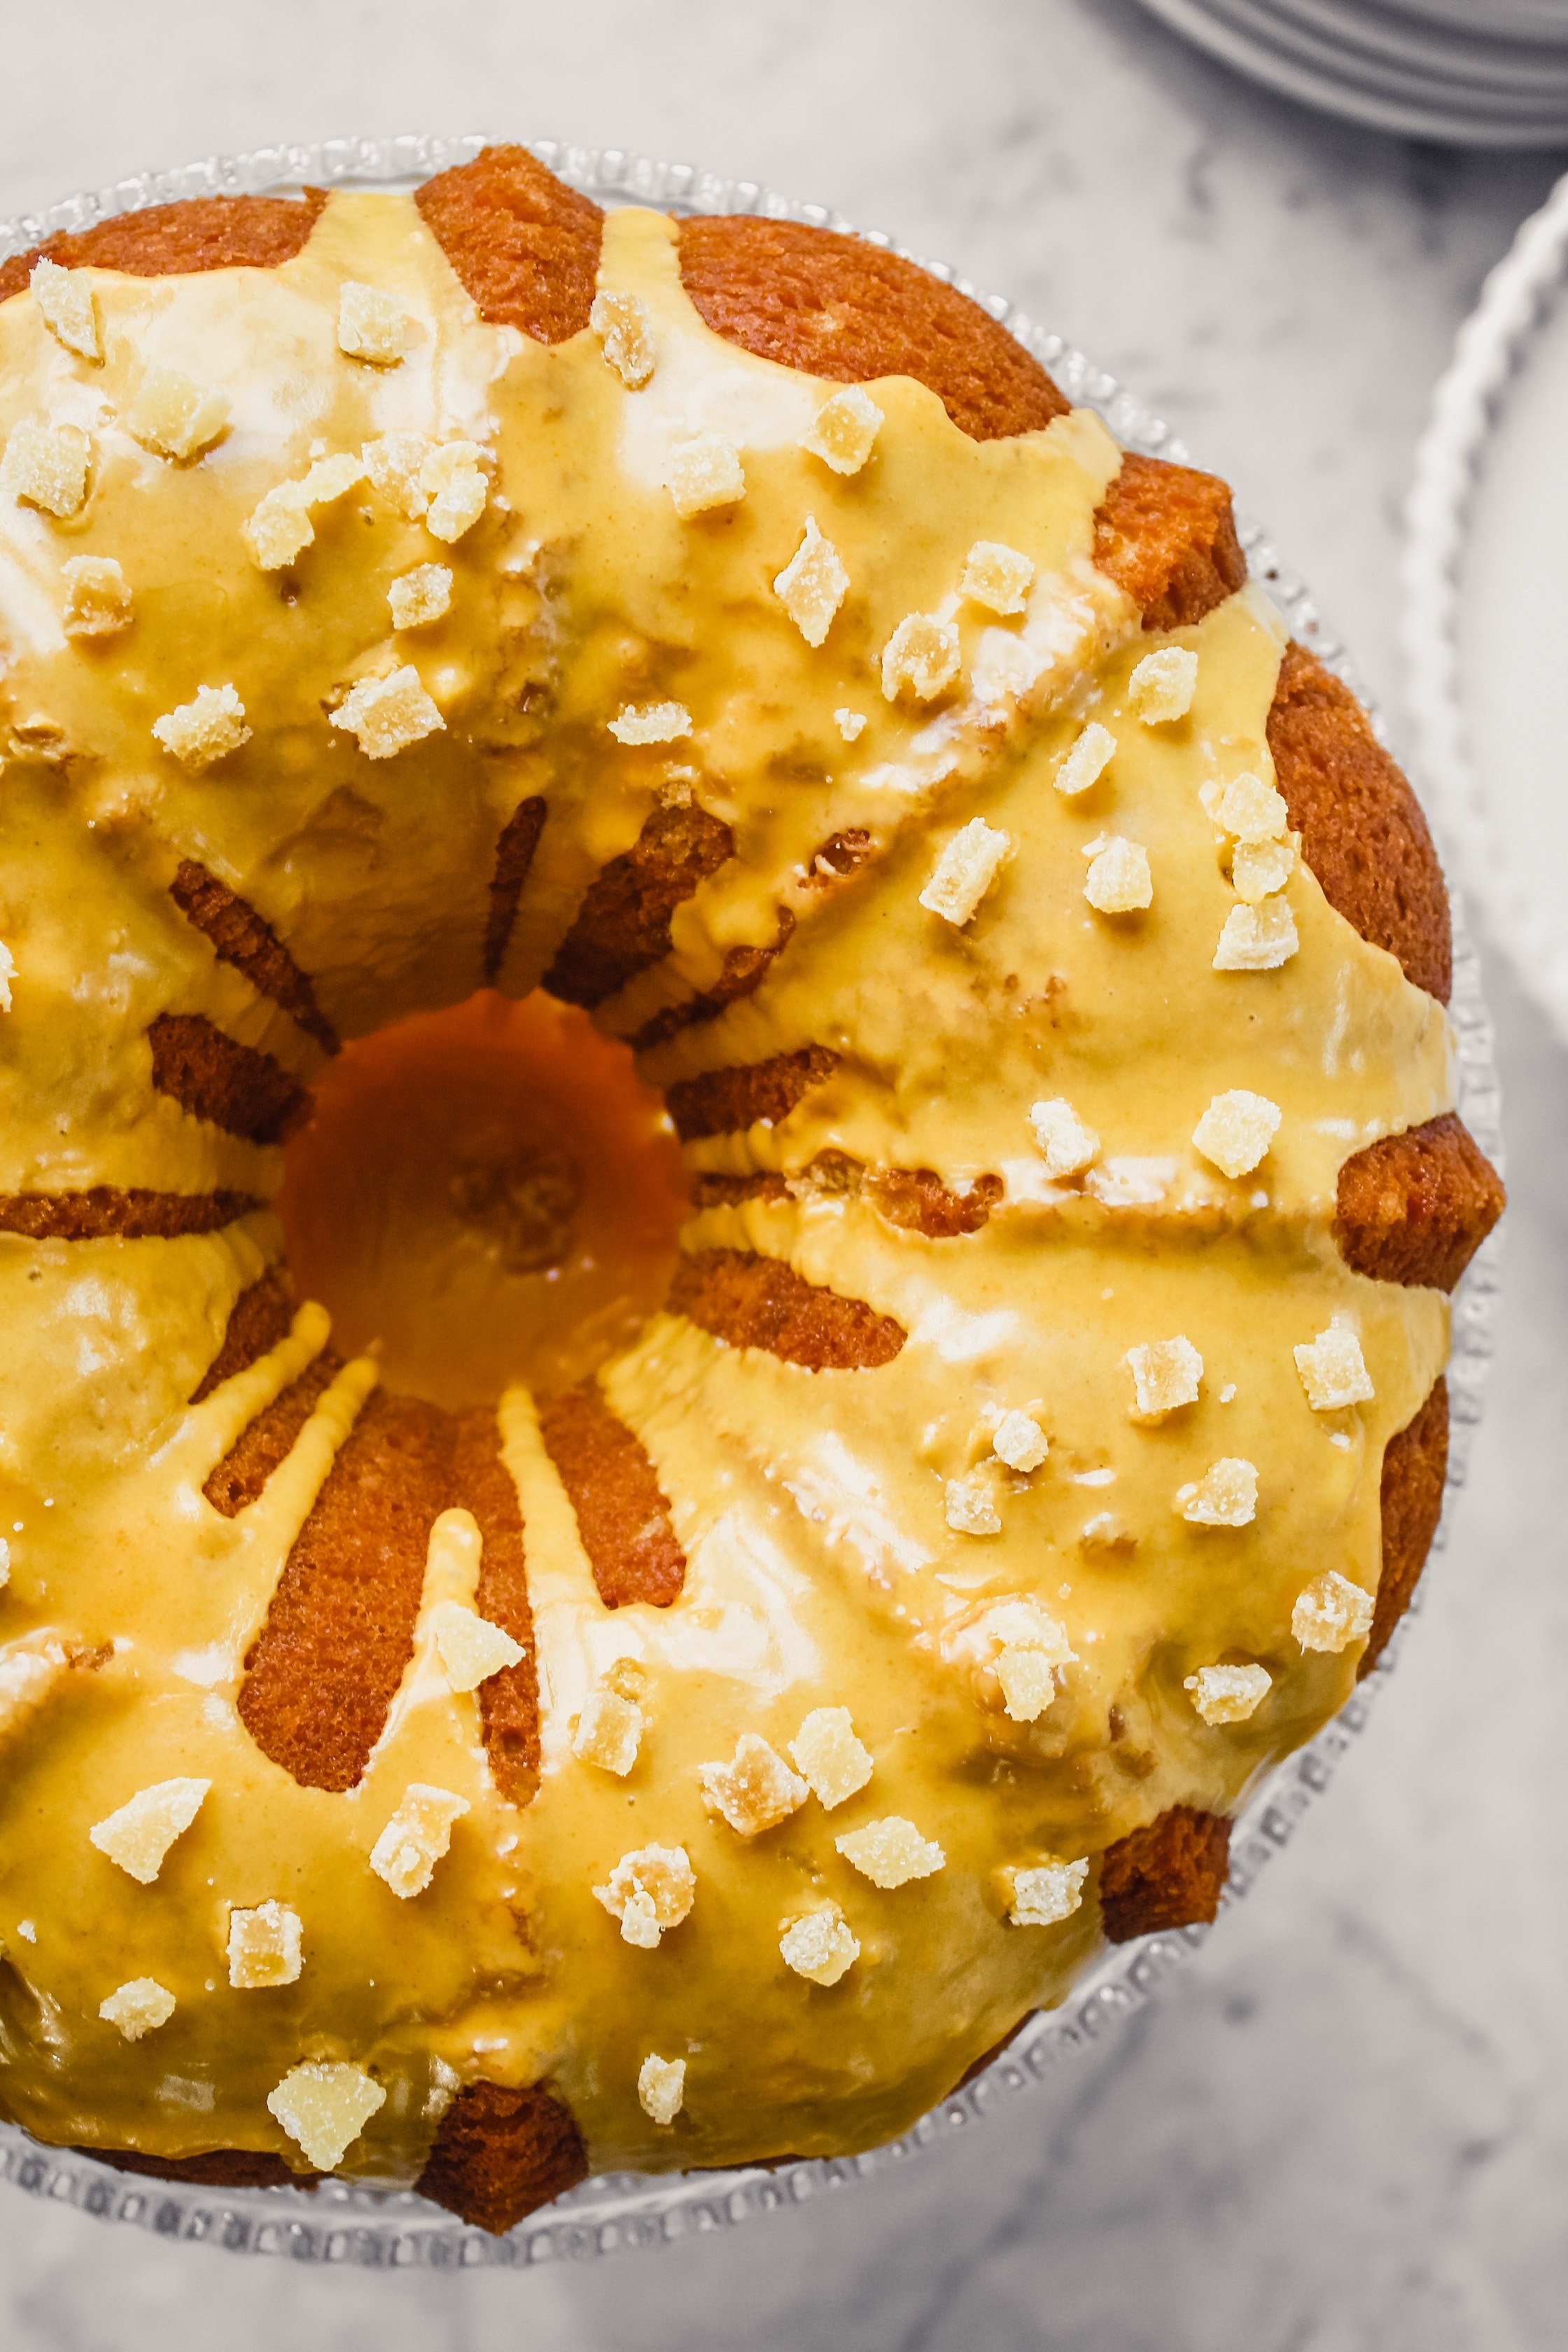 Photograph of orange and ginger bundt cake with turmeric glaze on glass cake stand